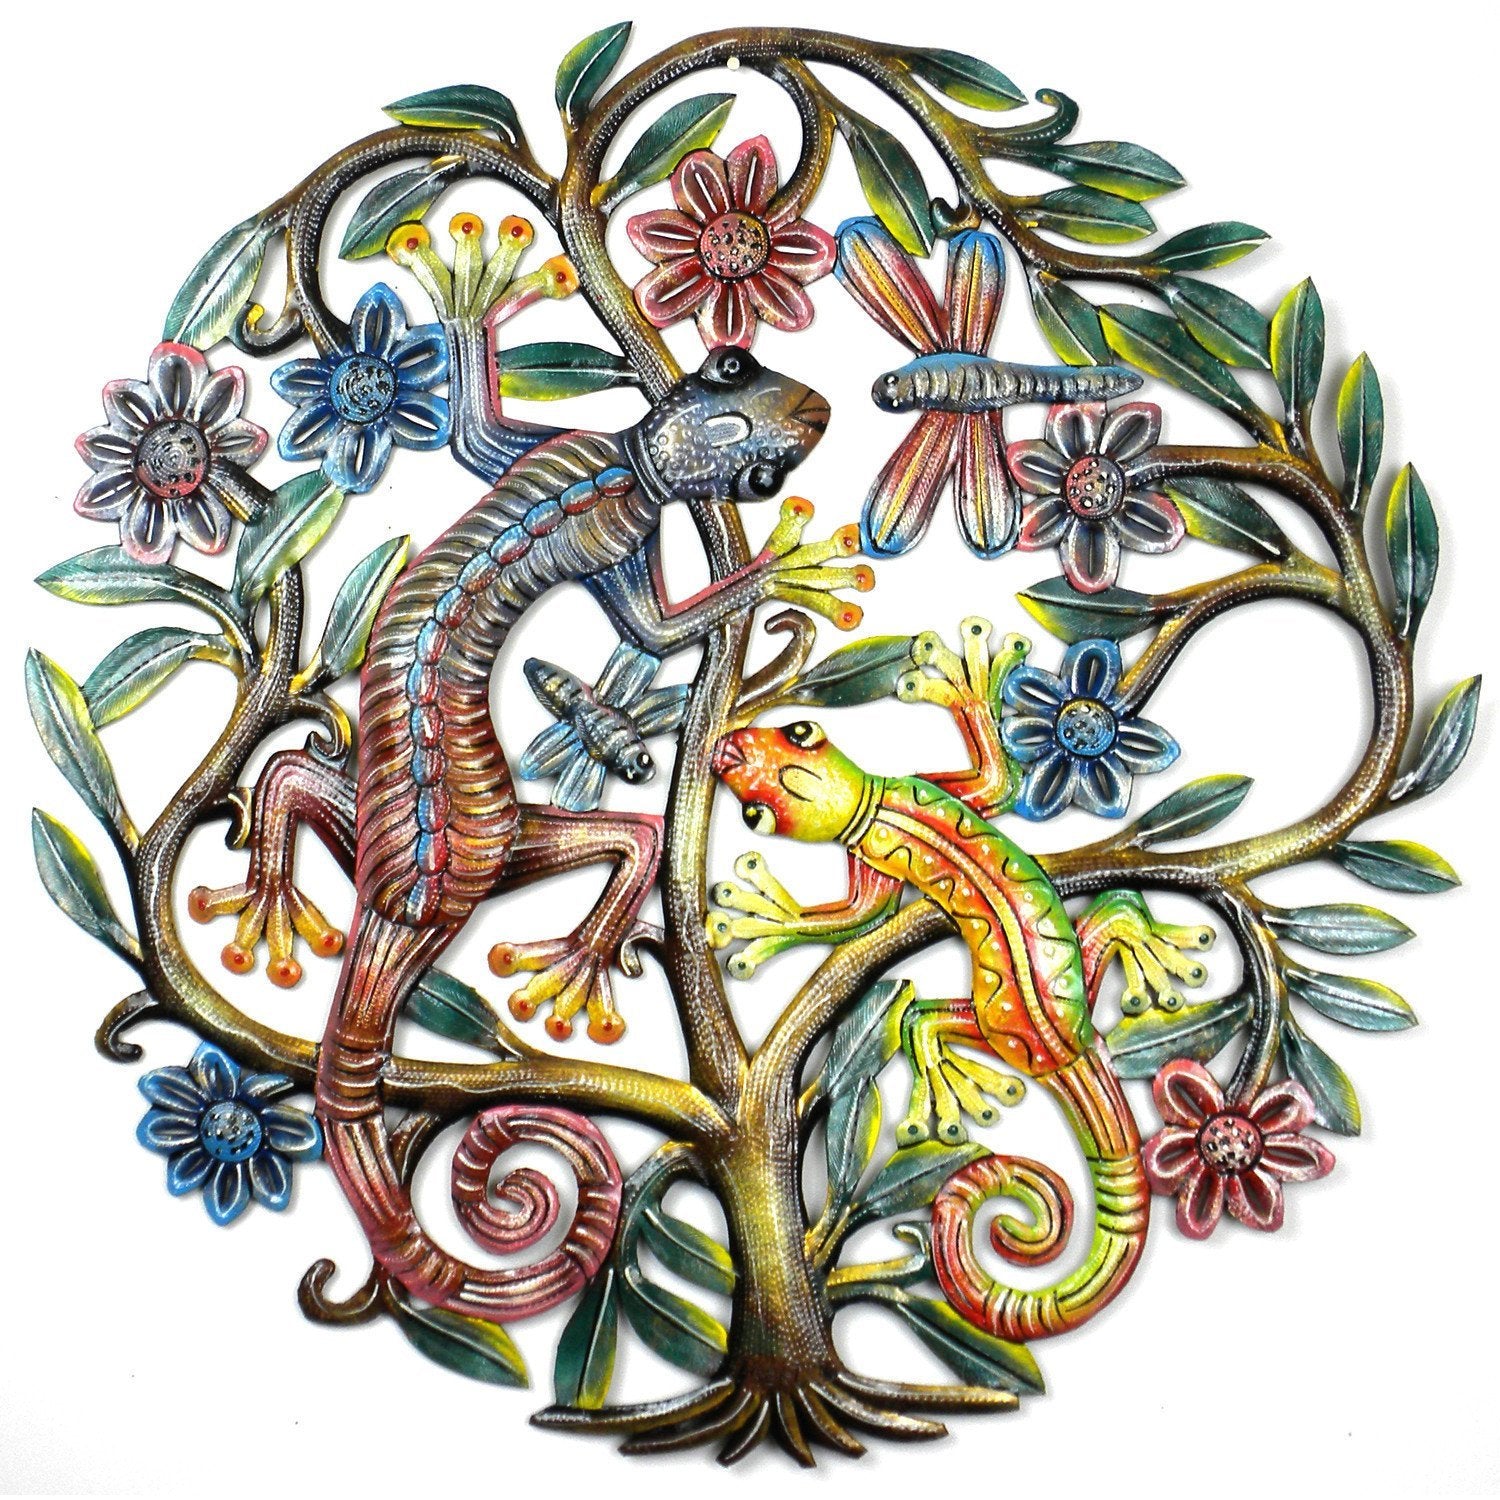 Painted Gecko Tree of Life Steel Drum Wall Art, 24" - Croix des Bouquets - Linda Kay Gifford’s - Those Nasty Women TALK! by SWEETSurvivor